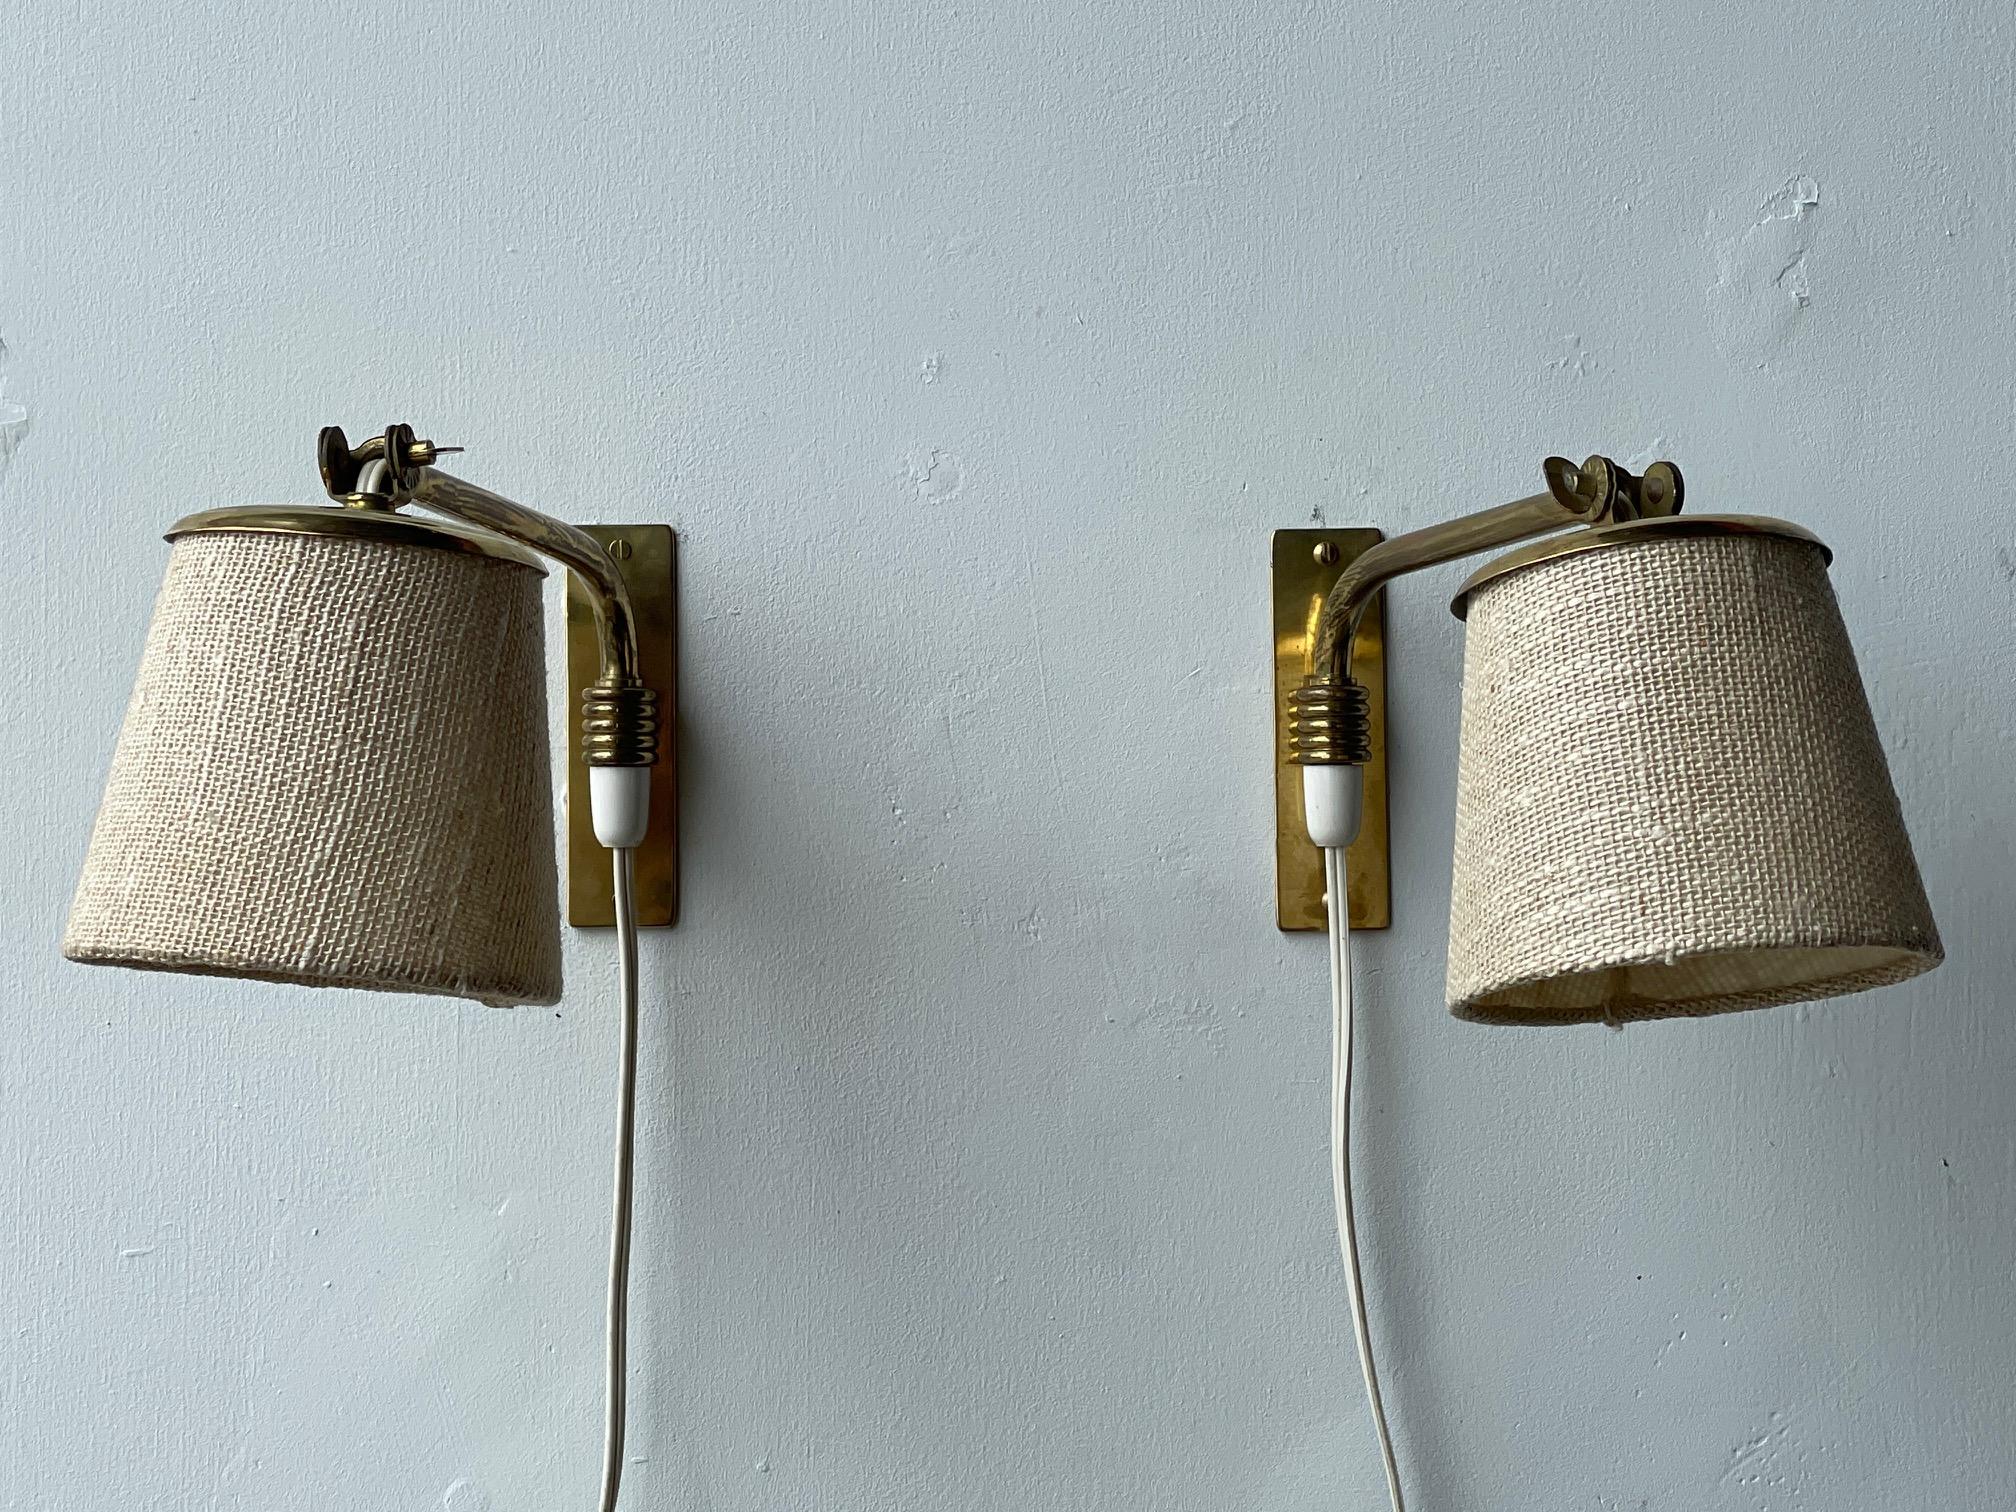 A pair of charming brass wall lights (sconces) by Itsu, Finland, ca' 1950's. Petite scale, wall switch, rewired for USA, can be used as uplights or downlights, pivoting. Nice original patina and beautiful attention to details, characteristic of